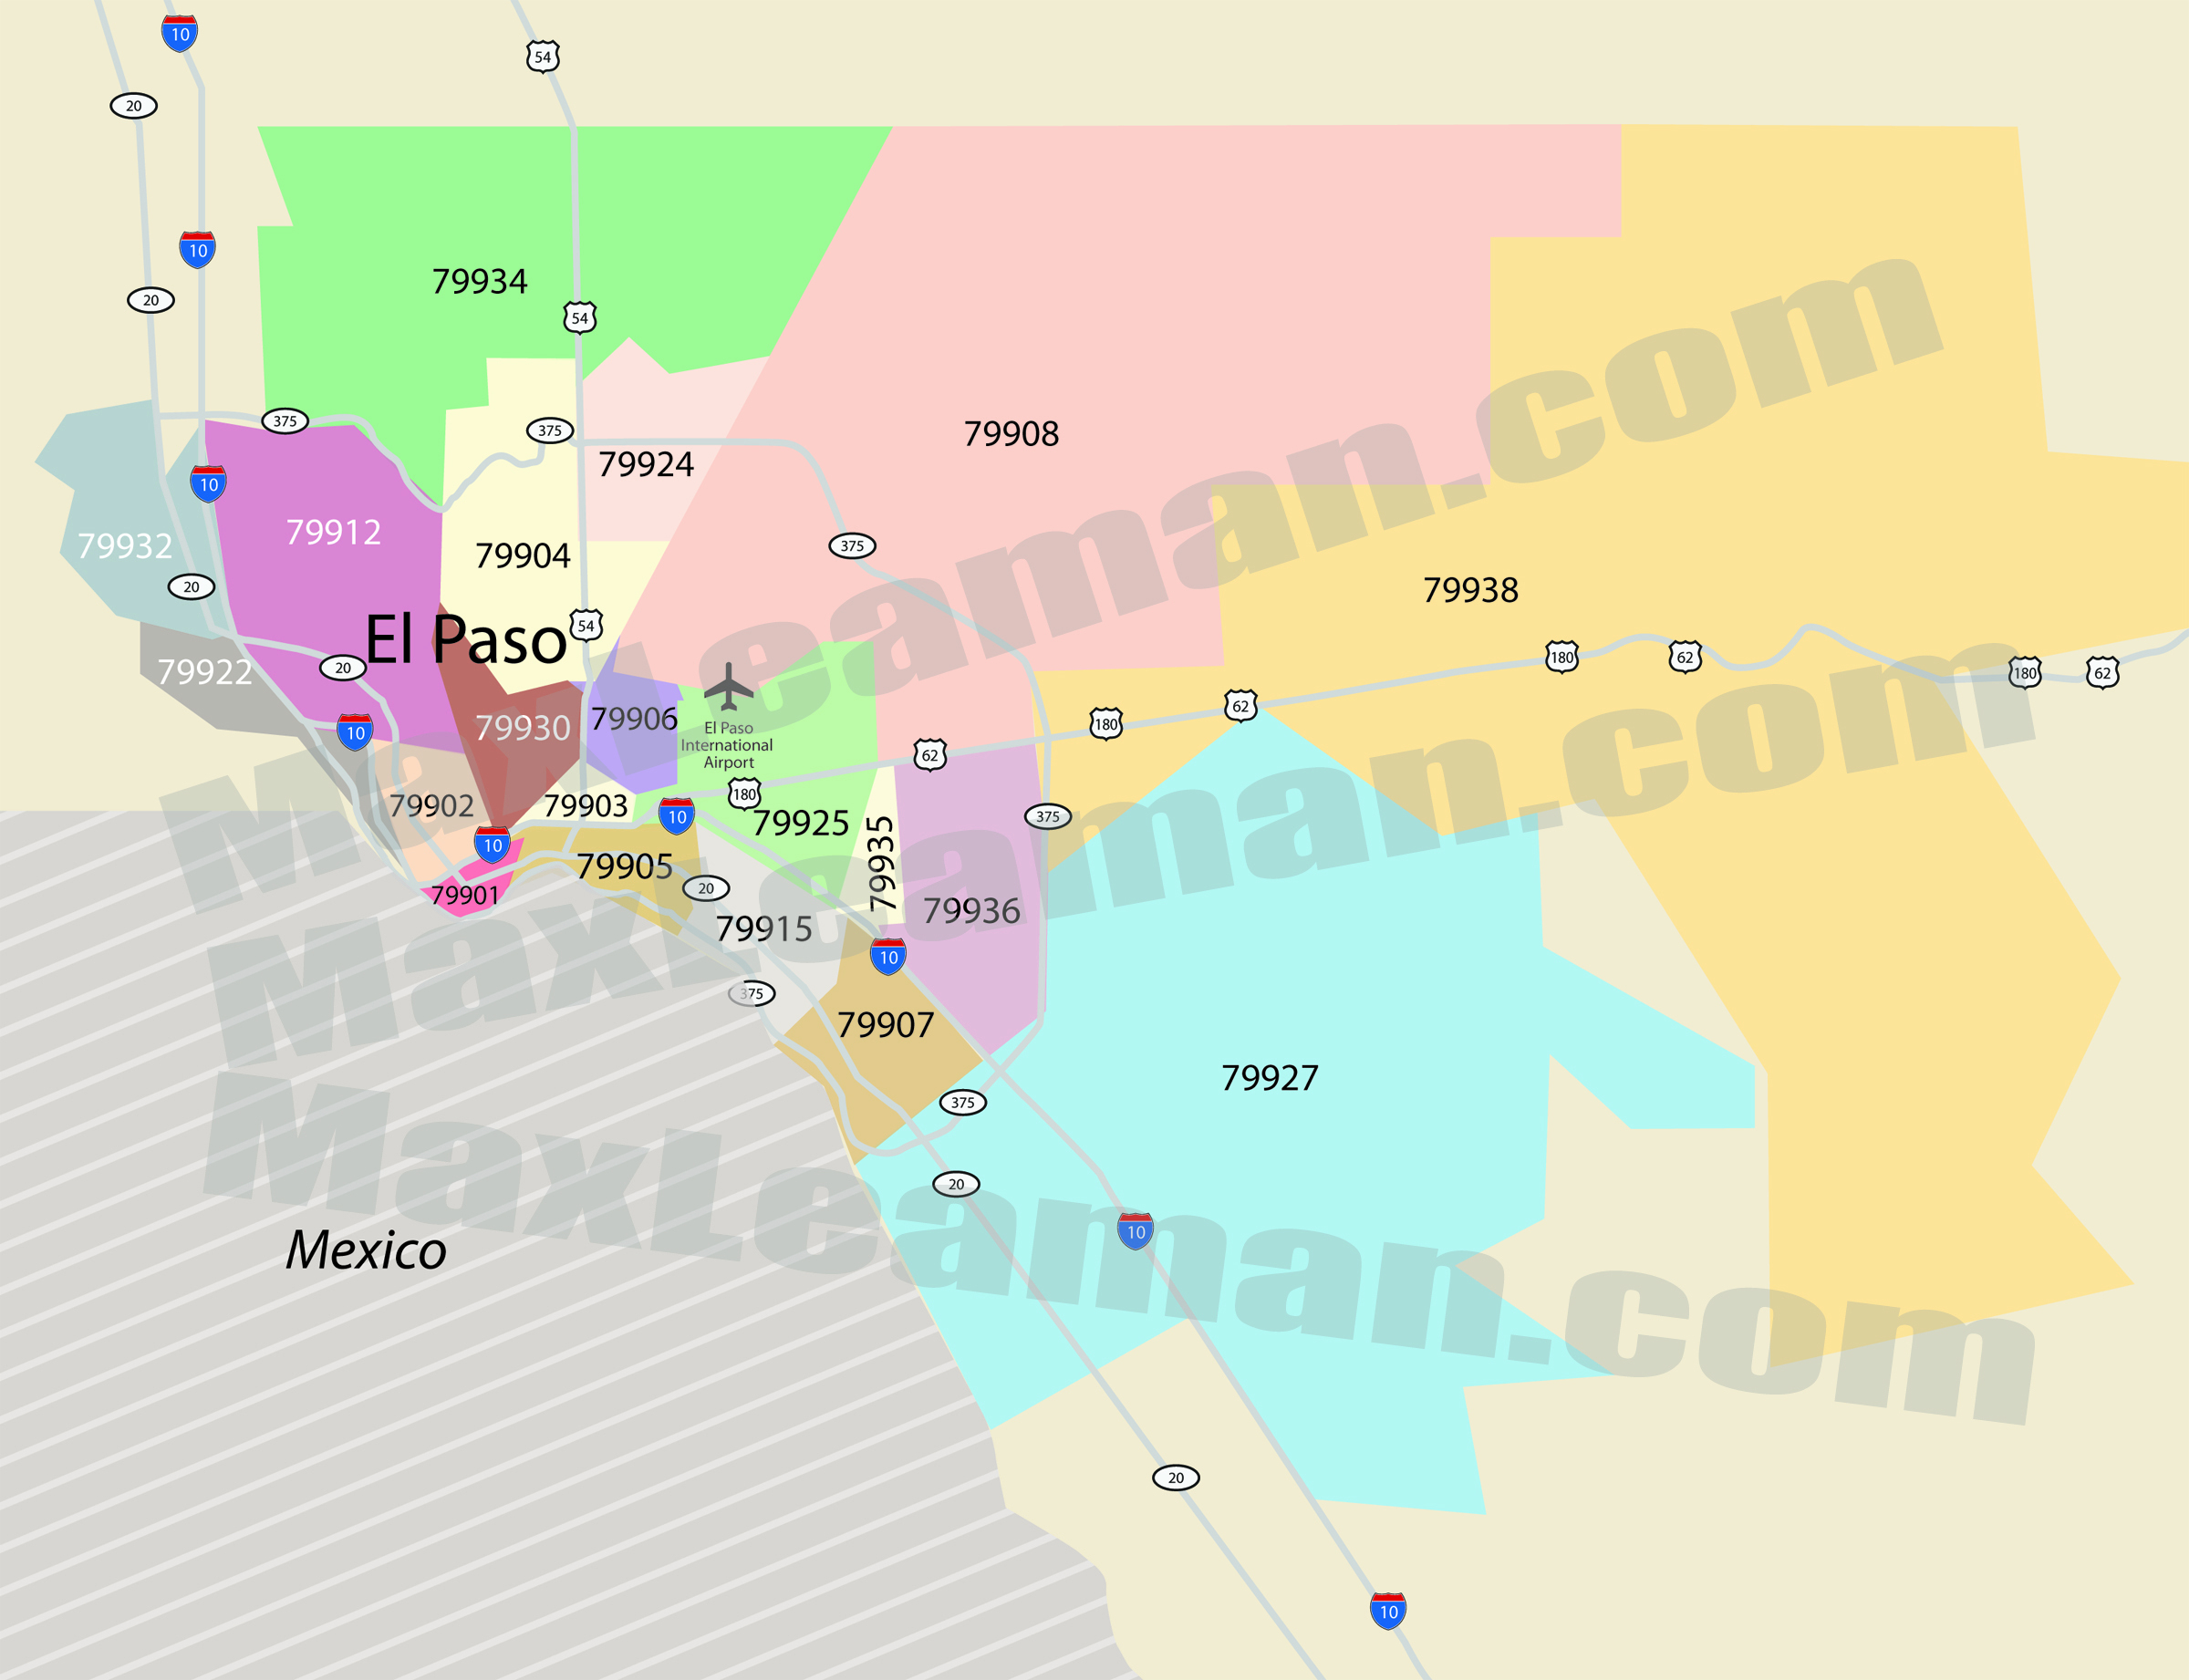 El Paso Texas Zip Code Map | Business Ideas 2013 - Where Is El Paso Texas On The Map